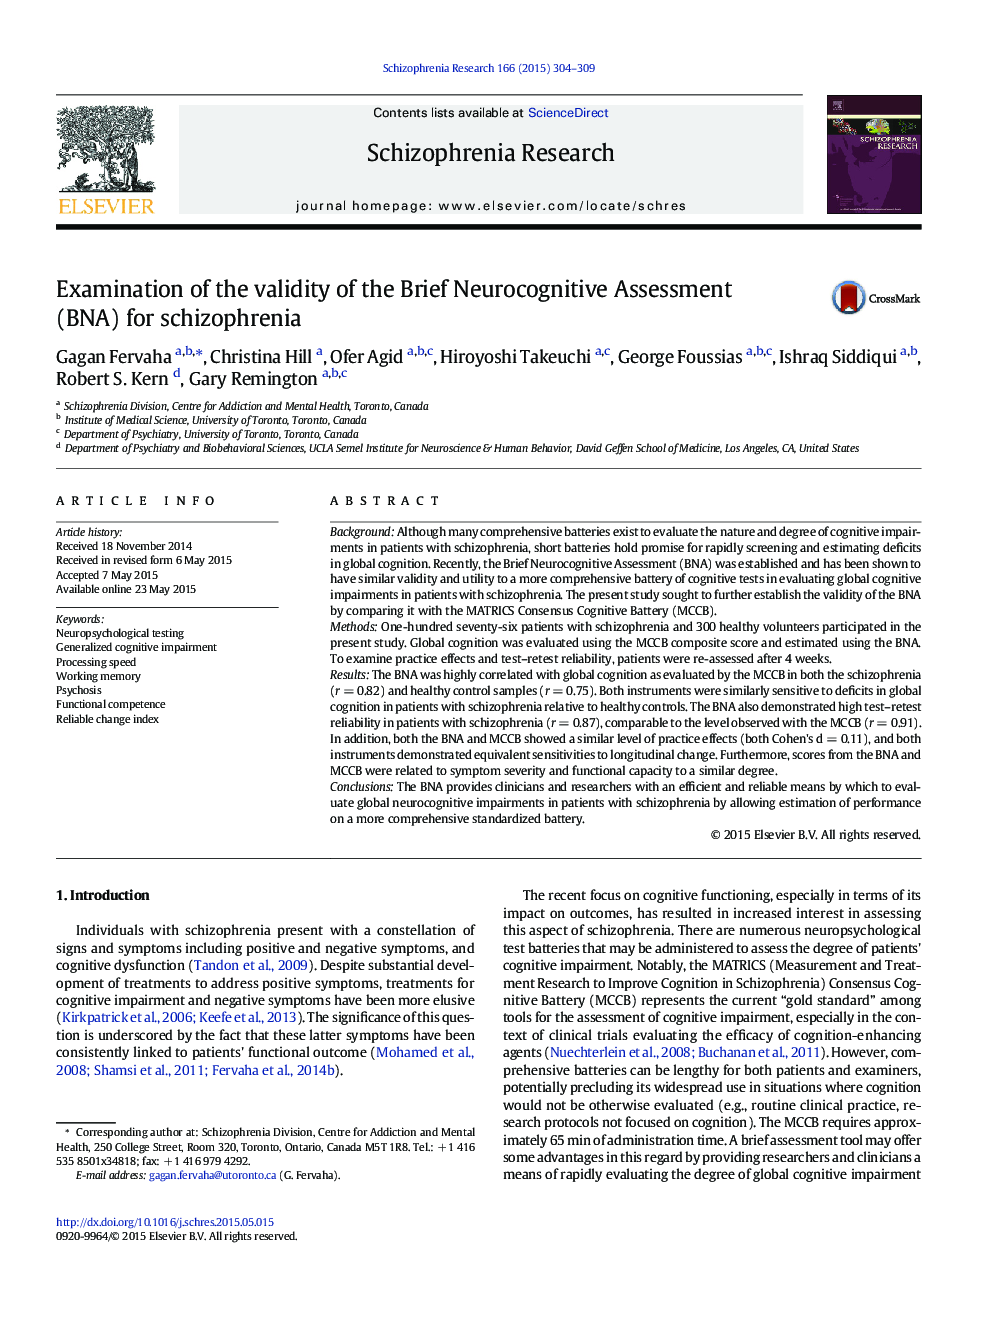 Examination of the validity of the Brief Neurocognitive Assessment (BNA) for schizophrenia